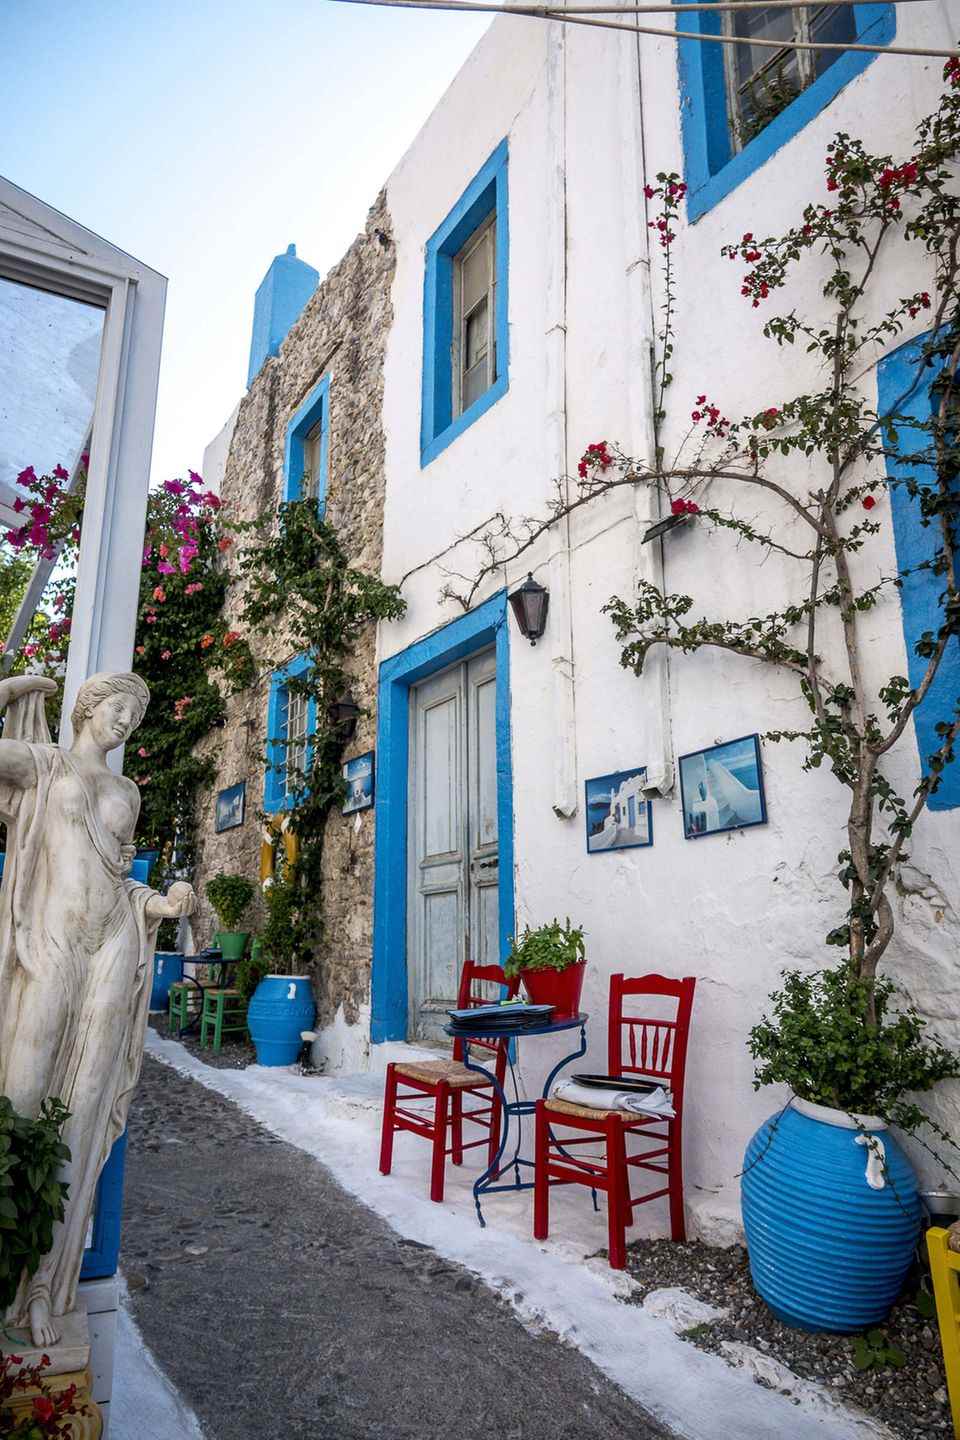 Frederik and Mary from Denmark love to stroll the picturesque streets of Greece during their holidays in Kos. 